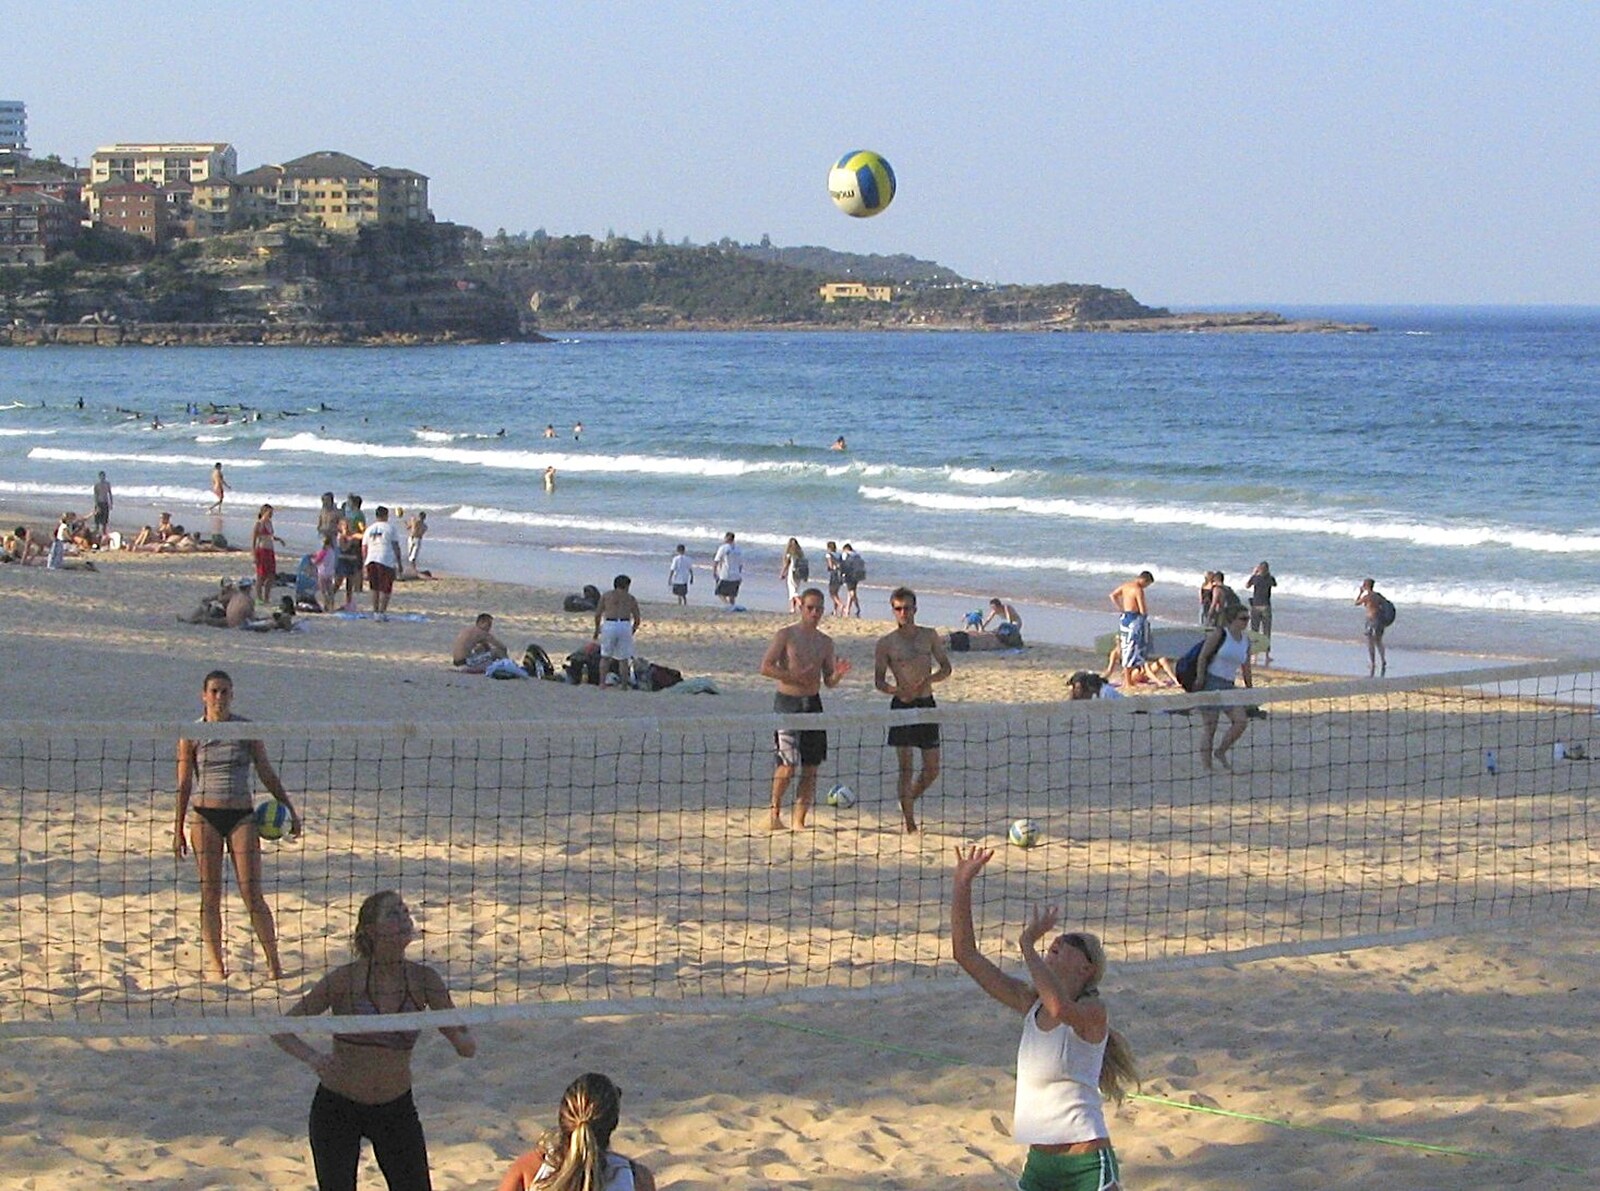 Volleyball on the beach at Manly from Sydney, New South Wales, Australia - 10th October 2004